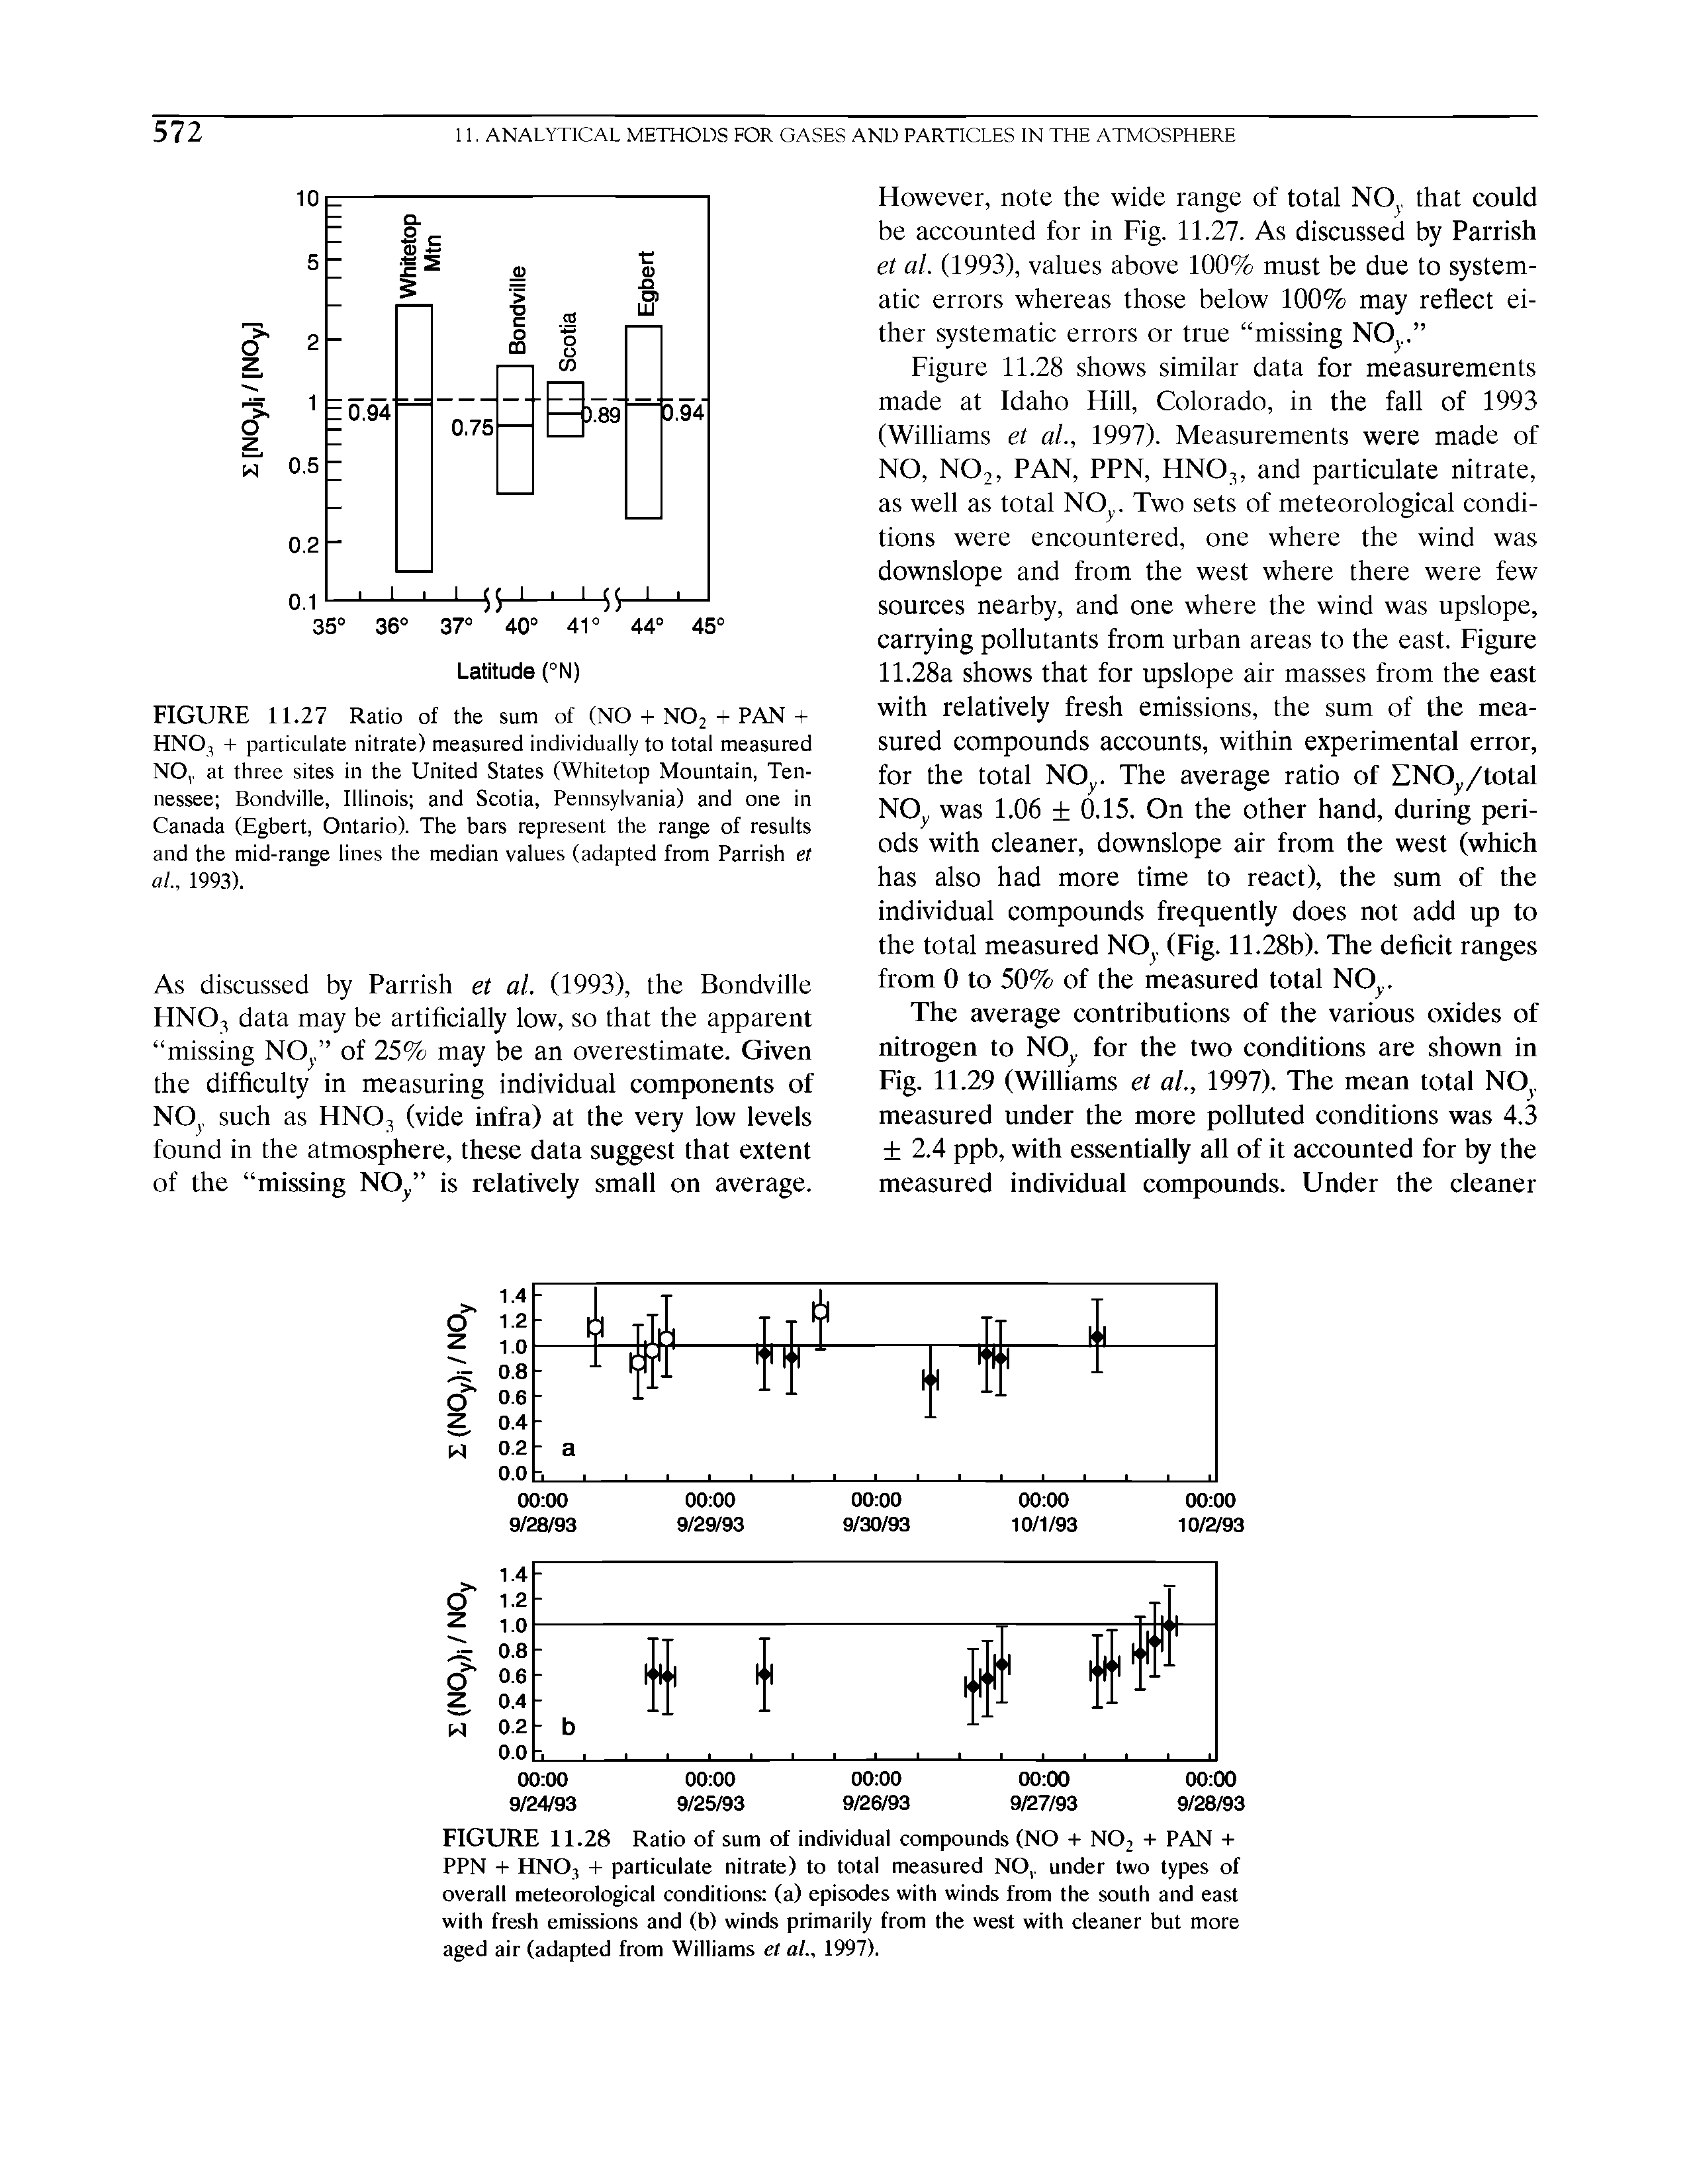 Figure 11.28 shows similar data for measurements made at Idaho Hill, Colorado, in the fall of 1993 (Williams et al., 1997). Measurements were made of NO, N02, PAN, PPN, HN03, and particulate nitrate, as well as total NO. Two sets of meteorological conditions were encountered, one where the wind was downslope and from the west where there were few sources nearby, and one where the wind was upslope, carrying pollutants from urban areas to the east. Figure 11.28a shows that for upslope air masses from the east with relatively fresh emissions, the sum of the measured compounds accounts, within experimental error, for the total NOy. The average ratio of NOy/total NOy was 1.06 + 0.15. On the other hand, during periods with cleaner, downslope air from the west (which has also had more time to react), the sum of the individual compounds frequently does not add up to the total measured NOy (Fig. 11.28b). The deficit ranges...